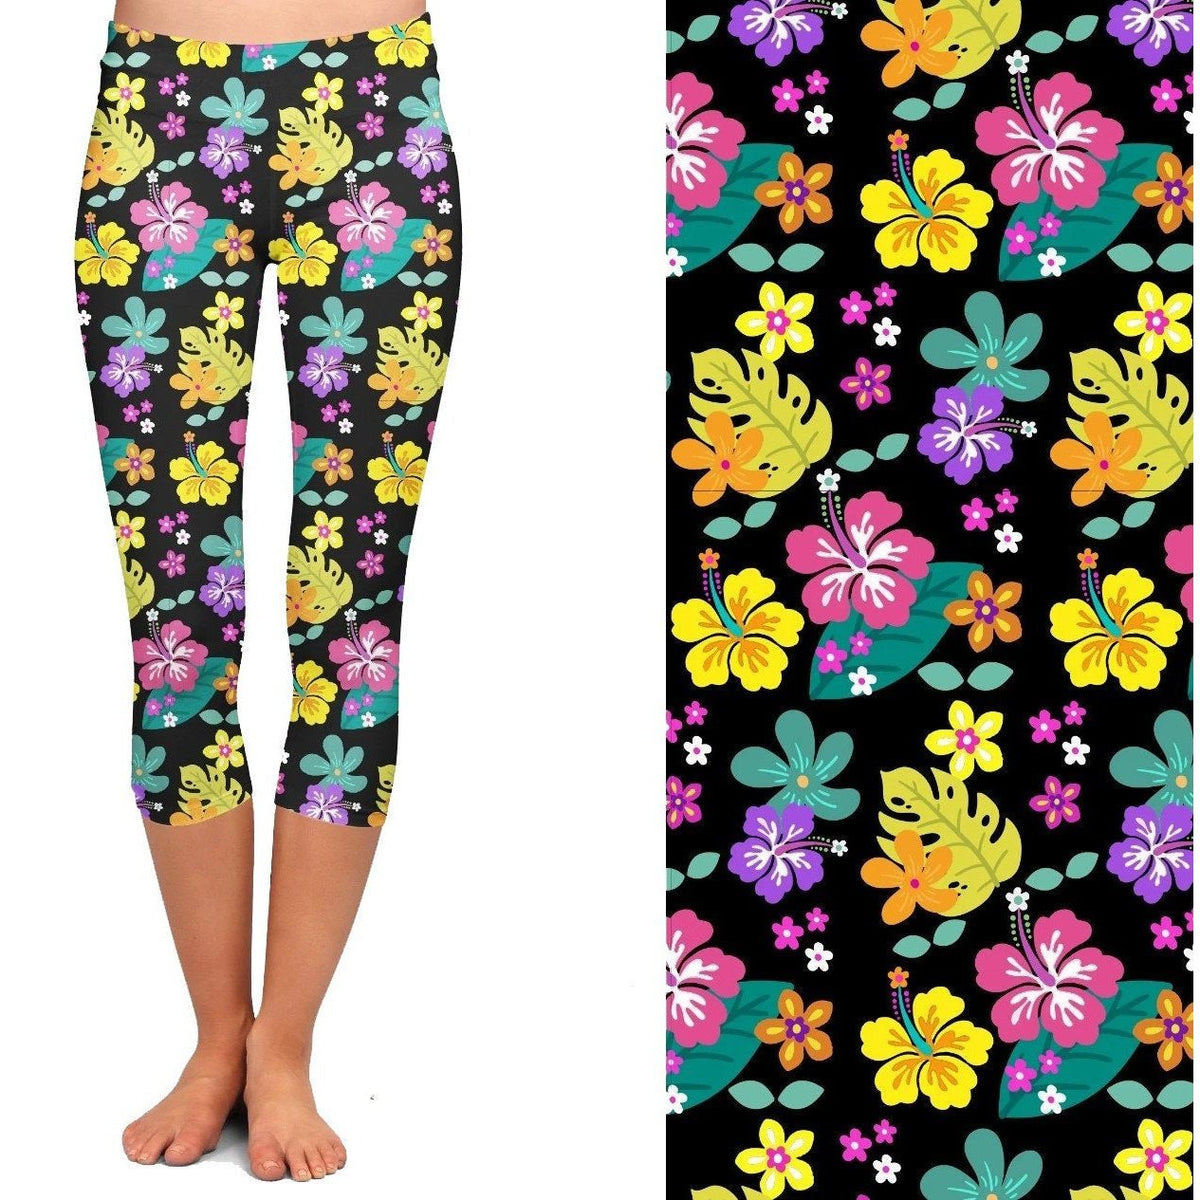 Hibiscus Leggings -Floral Spring Flowers Capri Black Background with Pockets